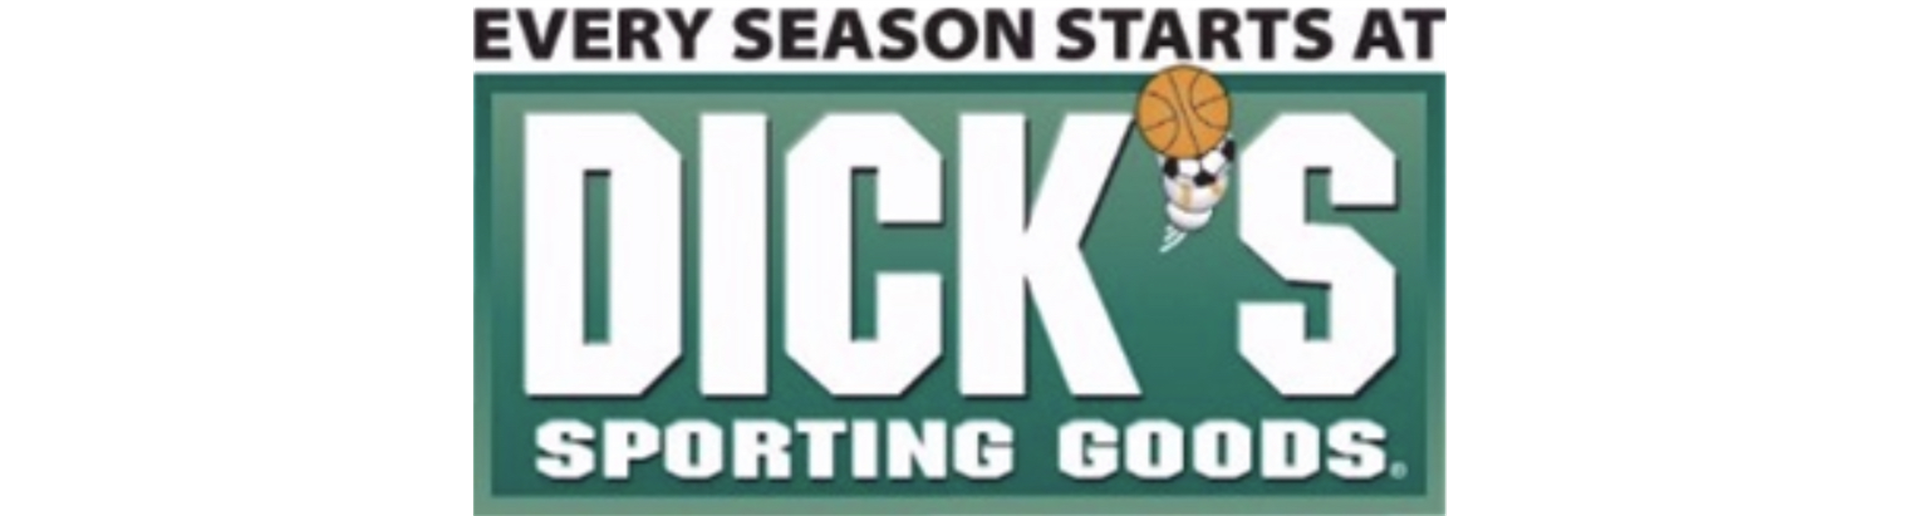 Save at DICK'S Sporting Goods